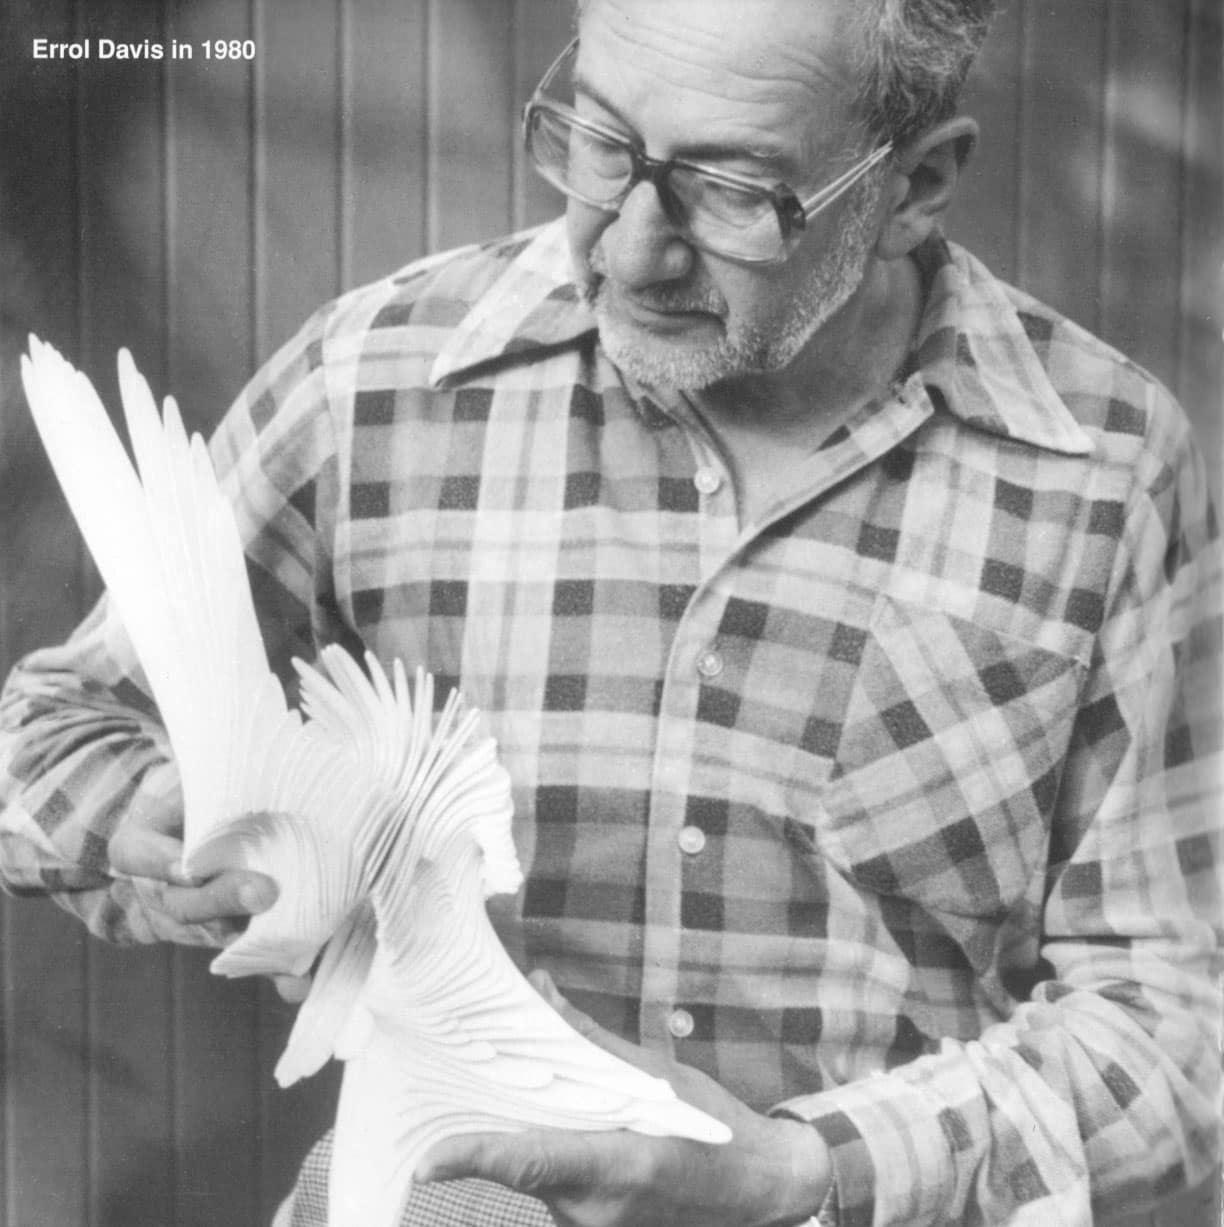 Errol Davis in 1980 holding a small stainless steel sculpture